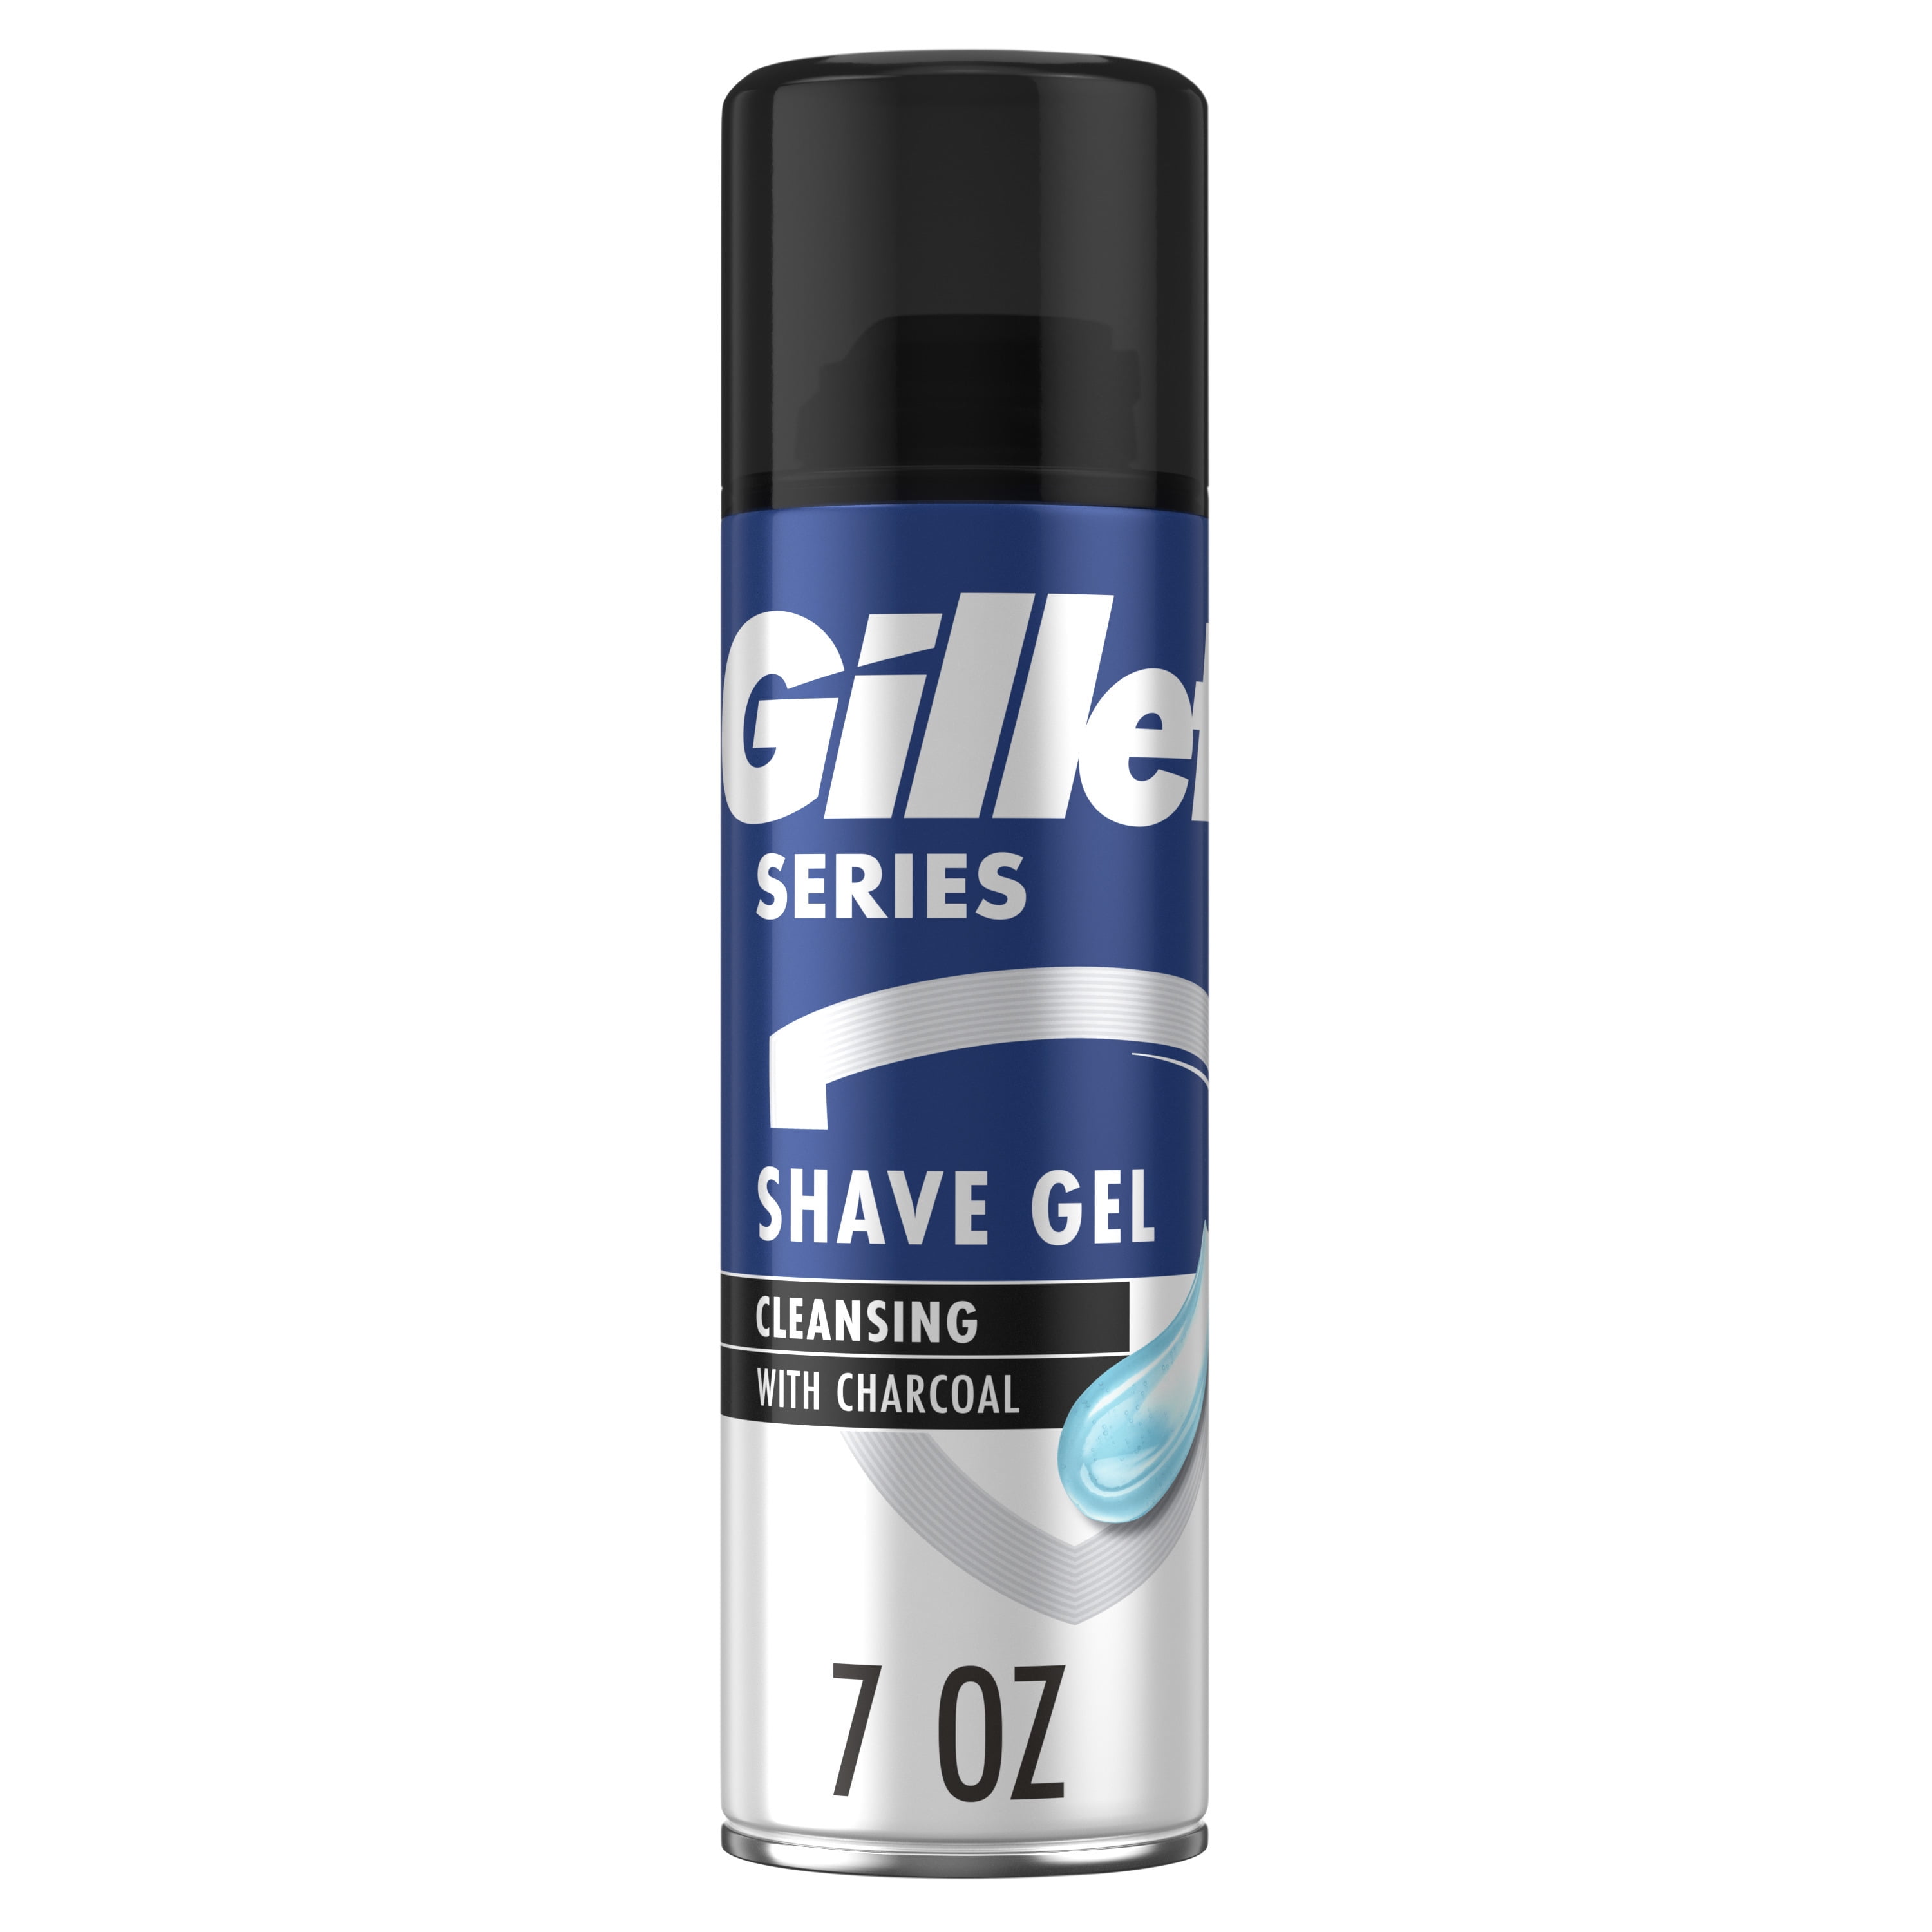 Gillette Series Cleansing Shave Gel for Men with Charcoal, 7 oz